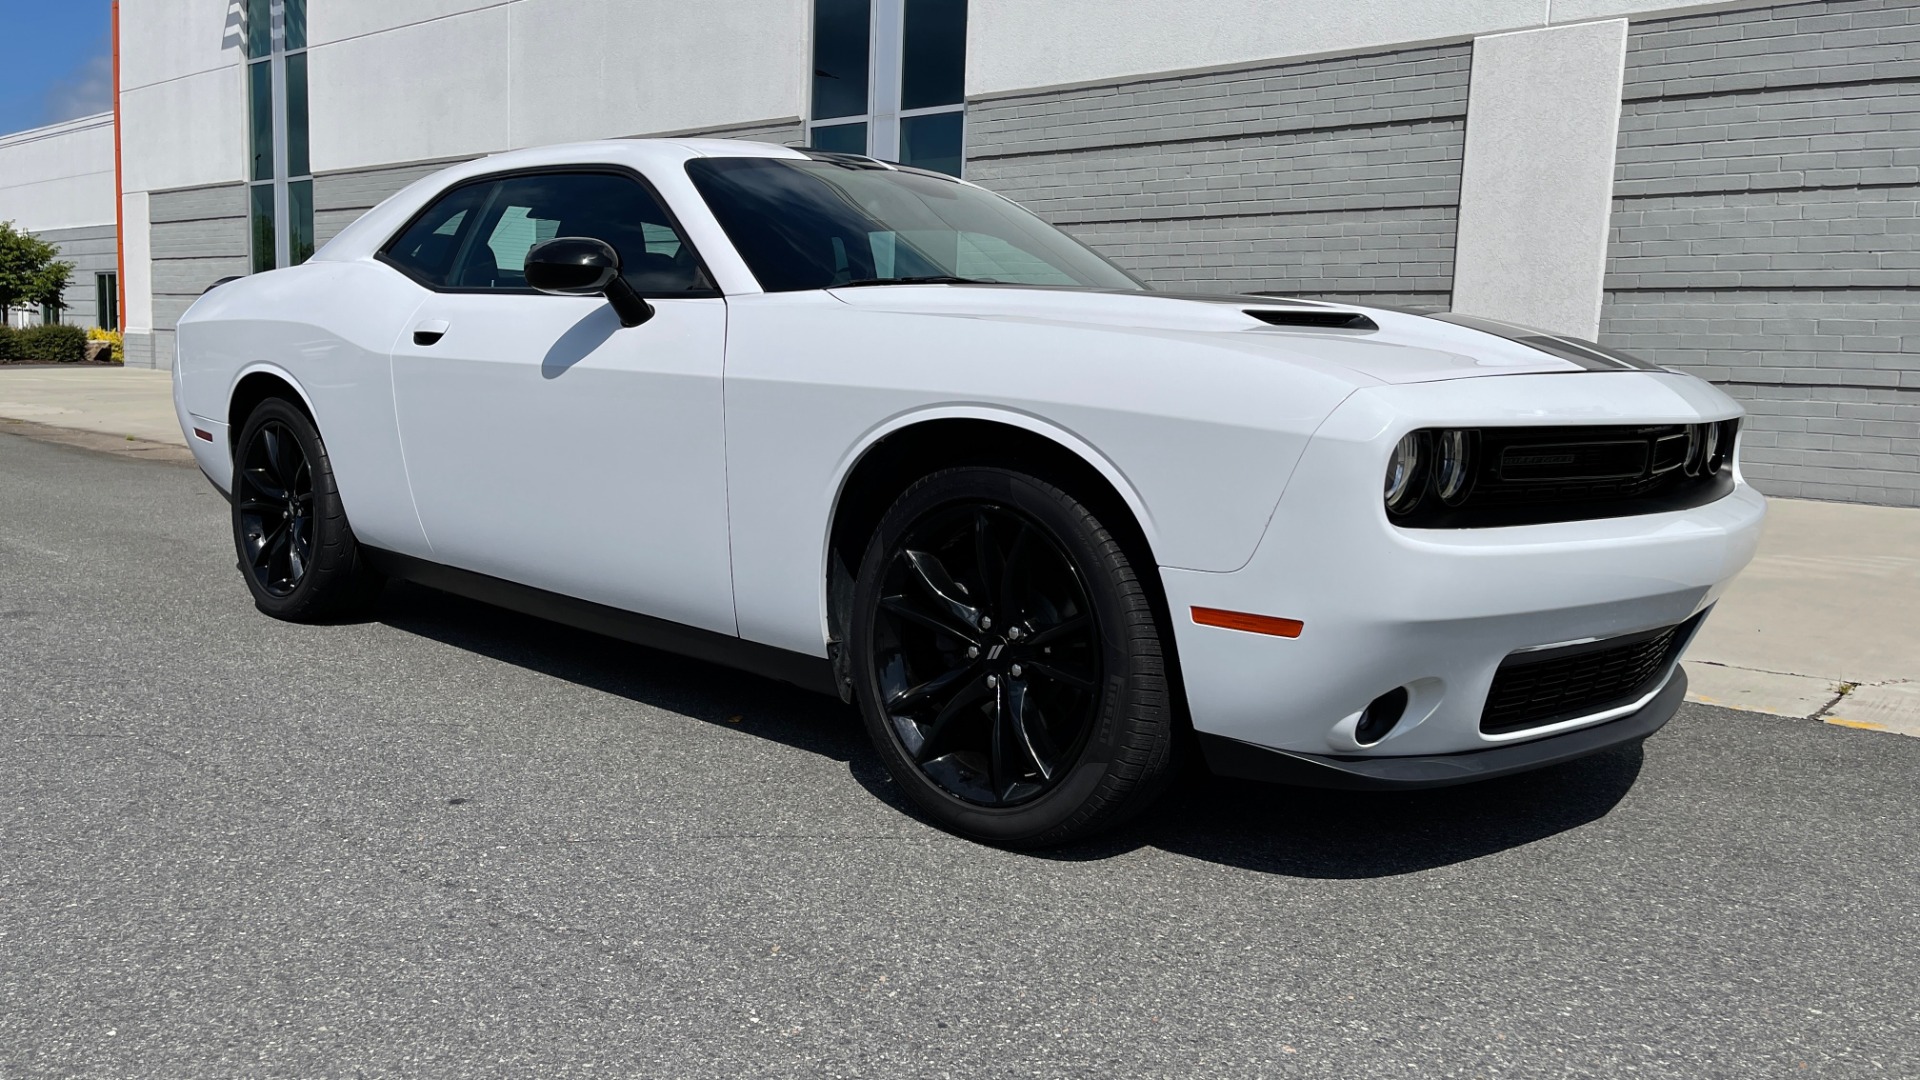 Used 2018 Dodge CHALLENGER SXT BLACKTOP COUPE / 3.6L V6 / 8-SPD AUTO / REARVIEW for sale Sold at Formula Imports in Charlotte NC 28227 6